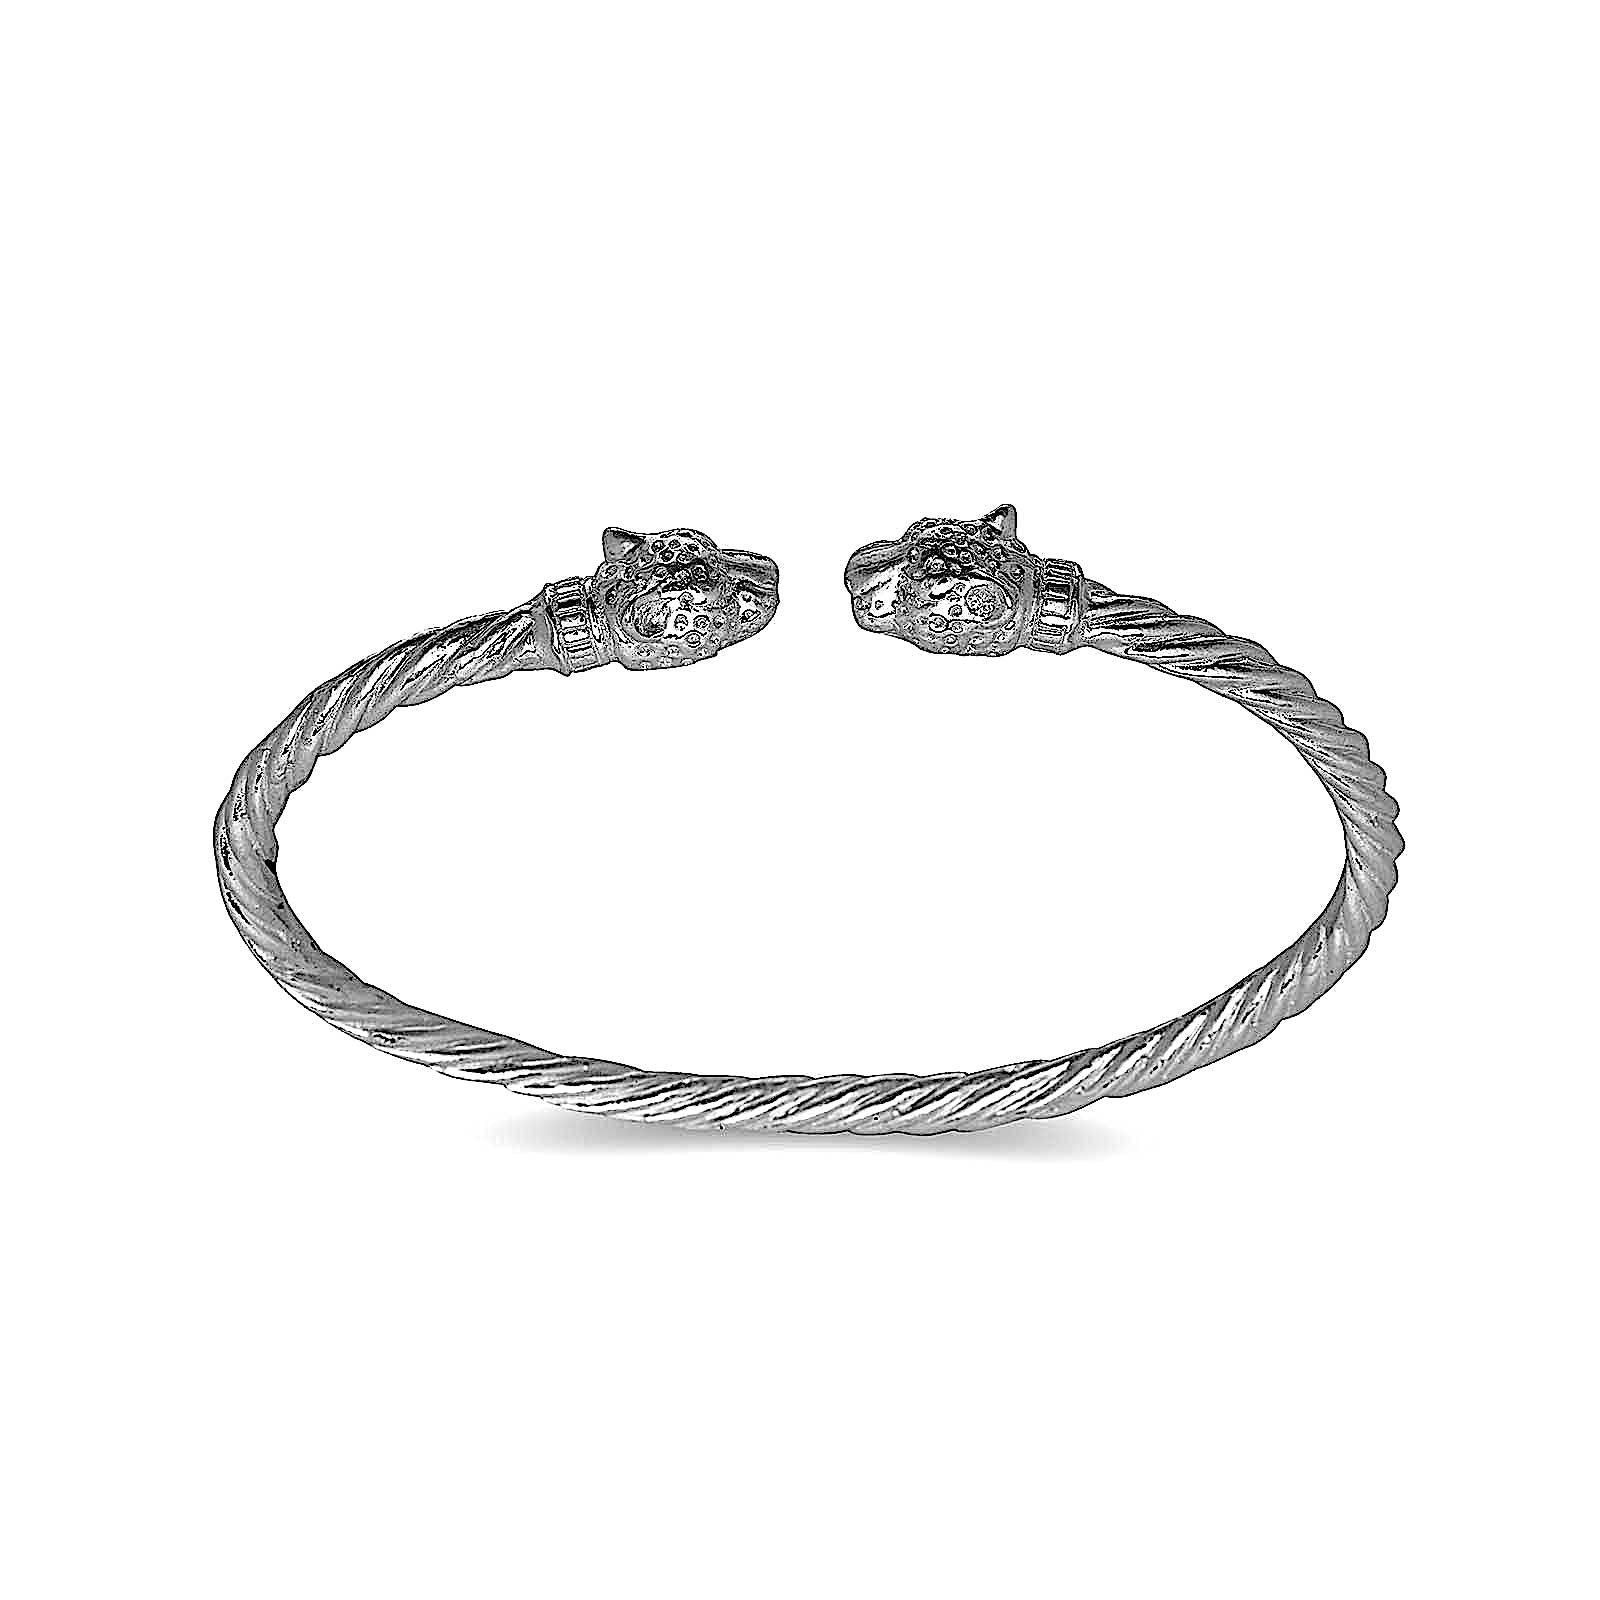 Jaguar head coiled rope West Indian bangle .925 Sterling silver MADE IN USA - Betterjewelry